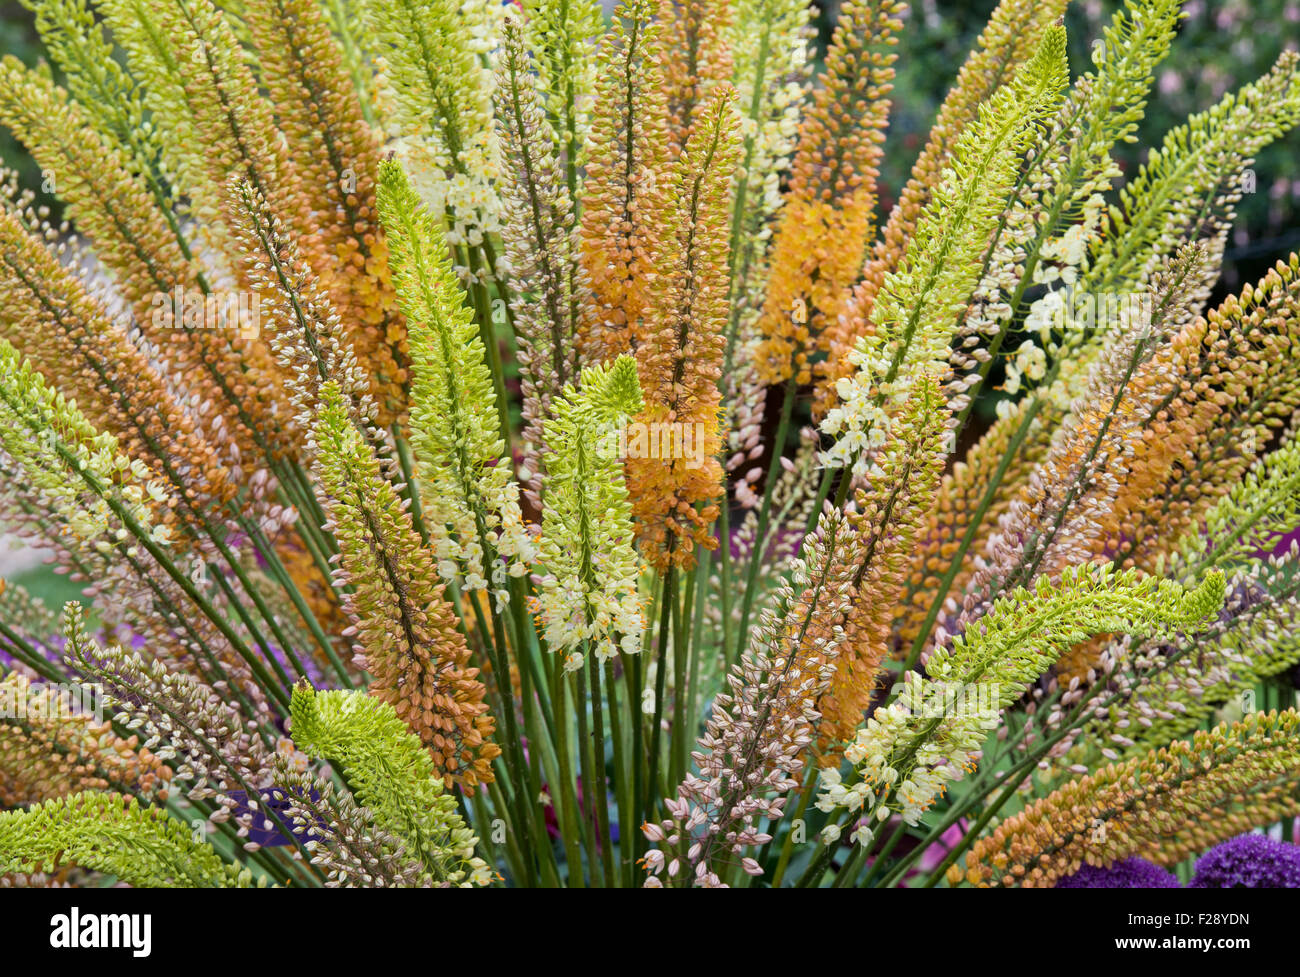 Eremurus. Display of foxtail lilies at RHS Wisley flower show. England Stock Photo